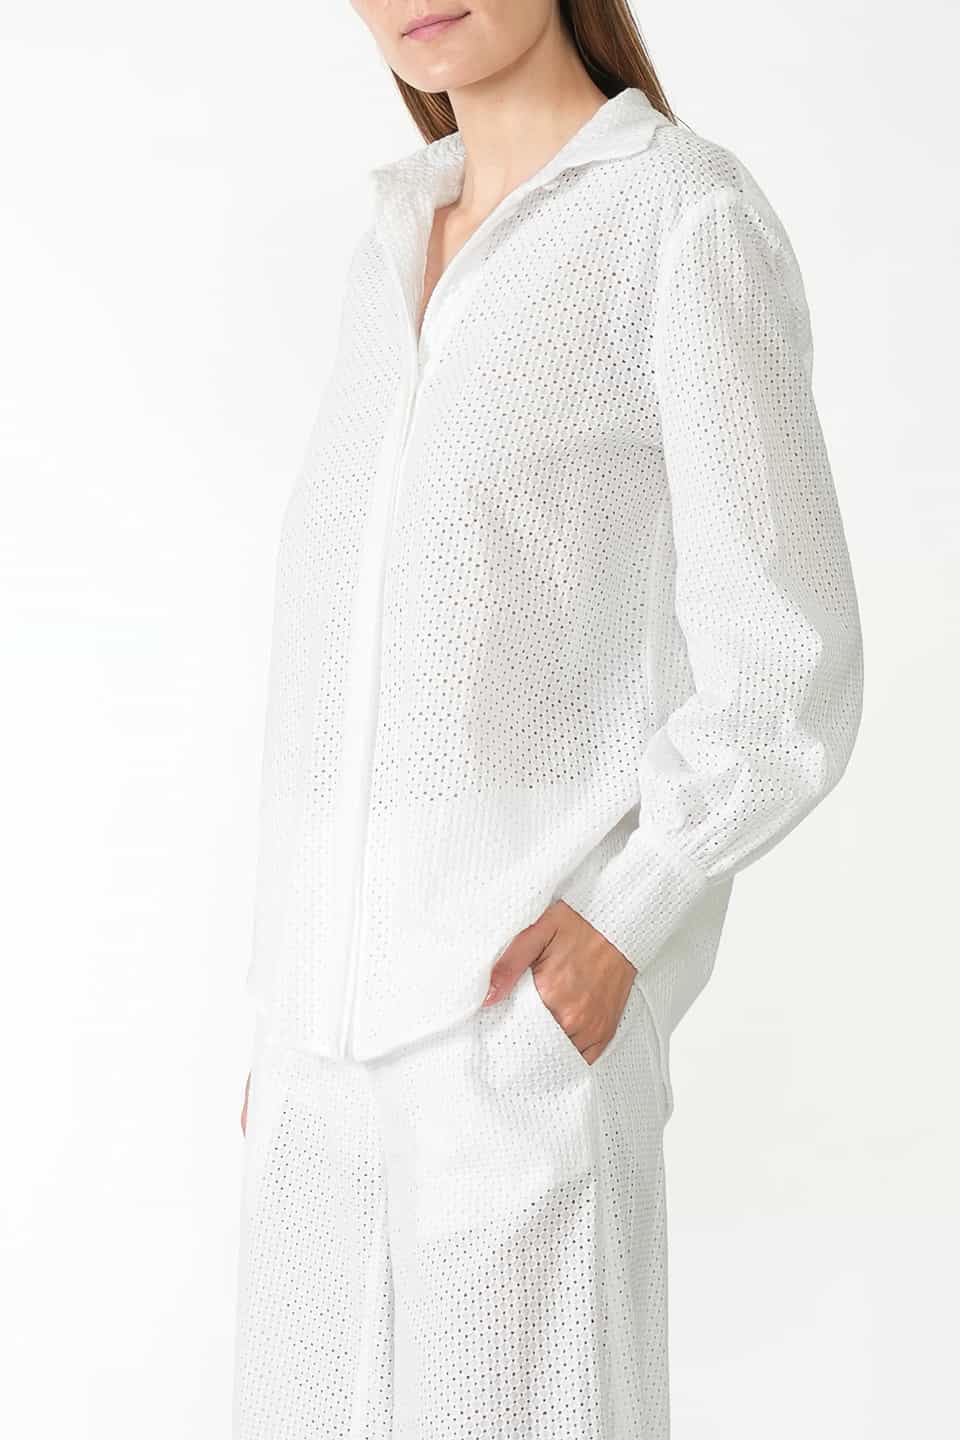 Designer White Women long sleeve, shop online with free delivery in UAE. Product gallery 2